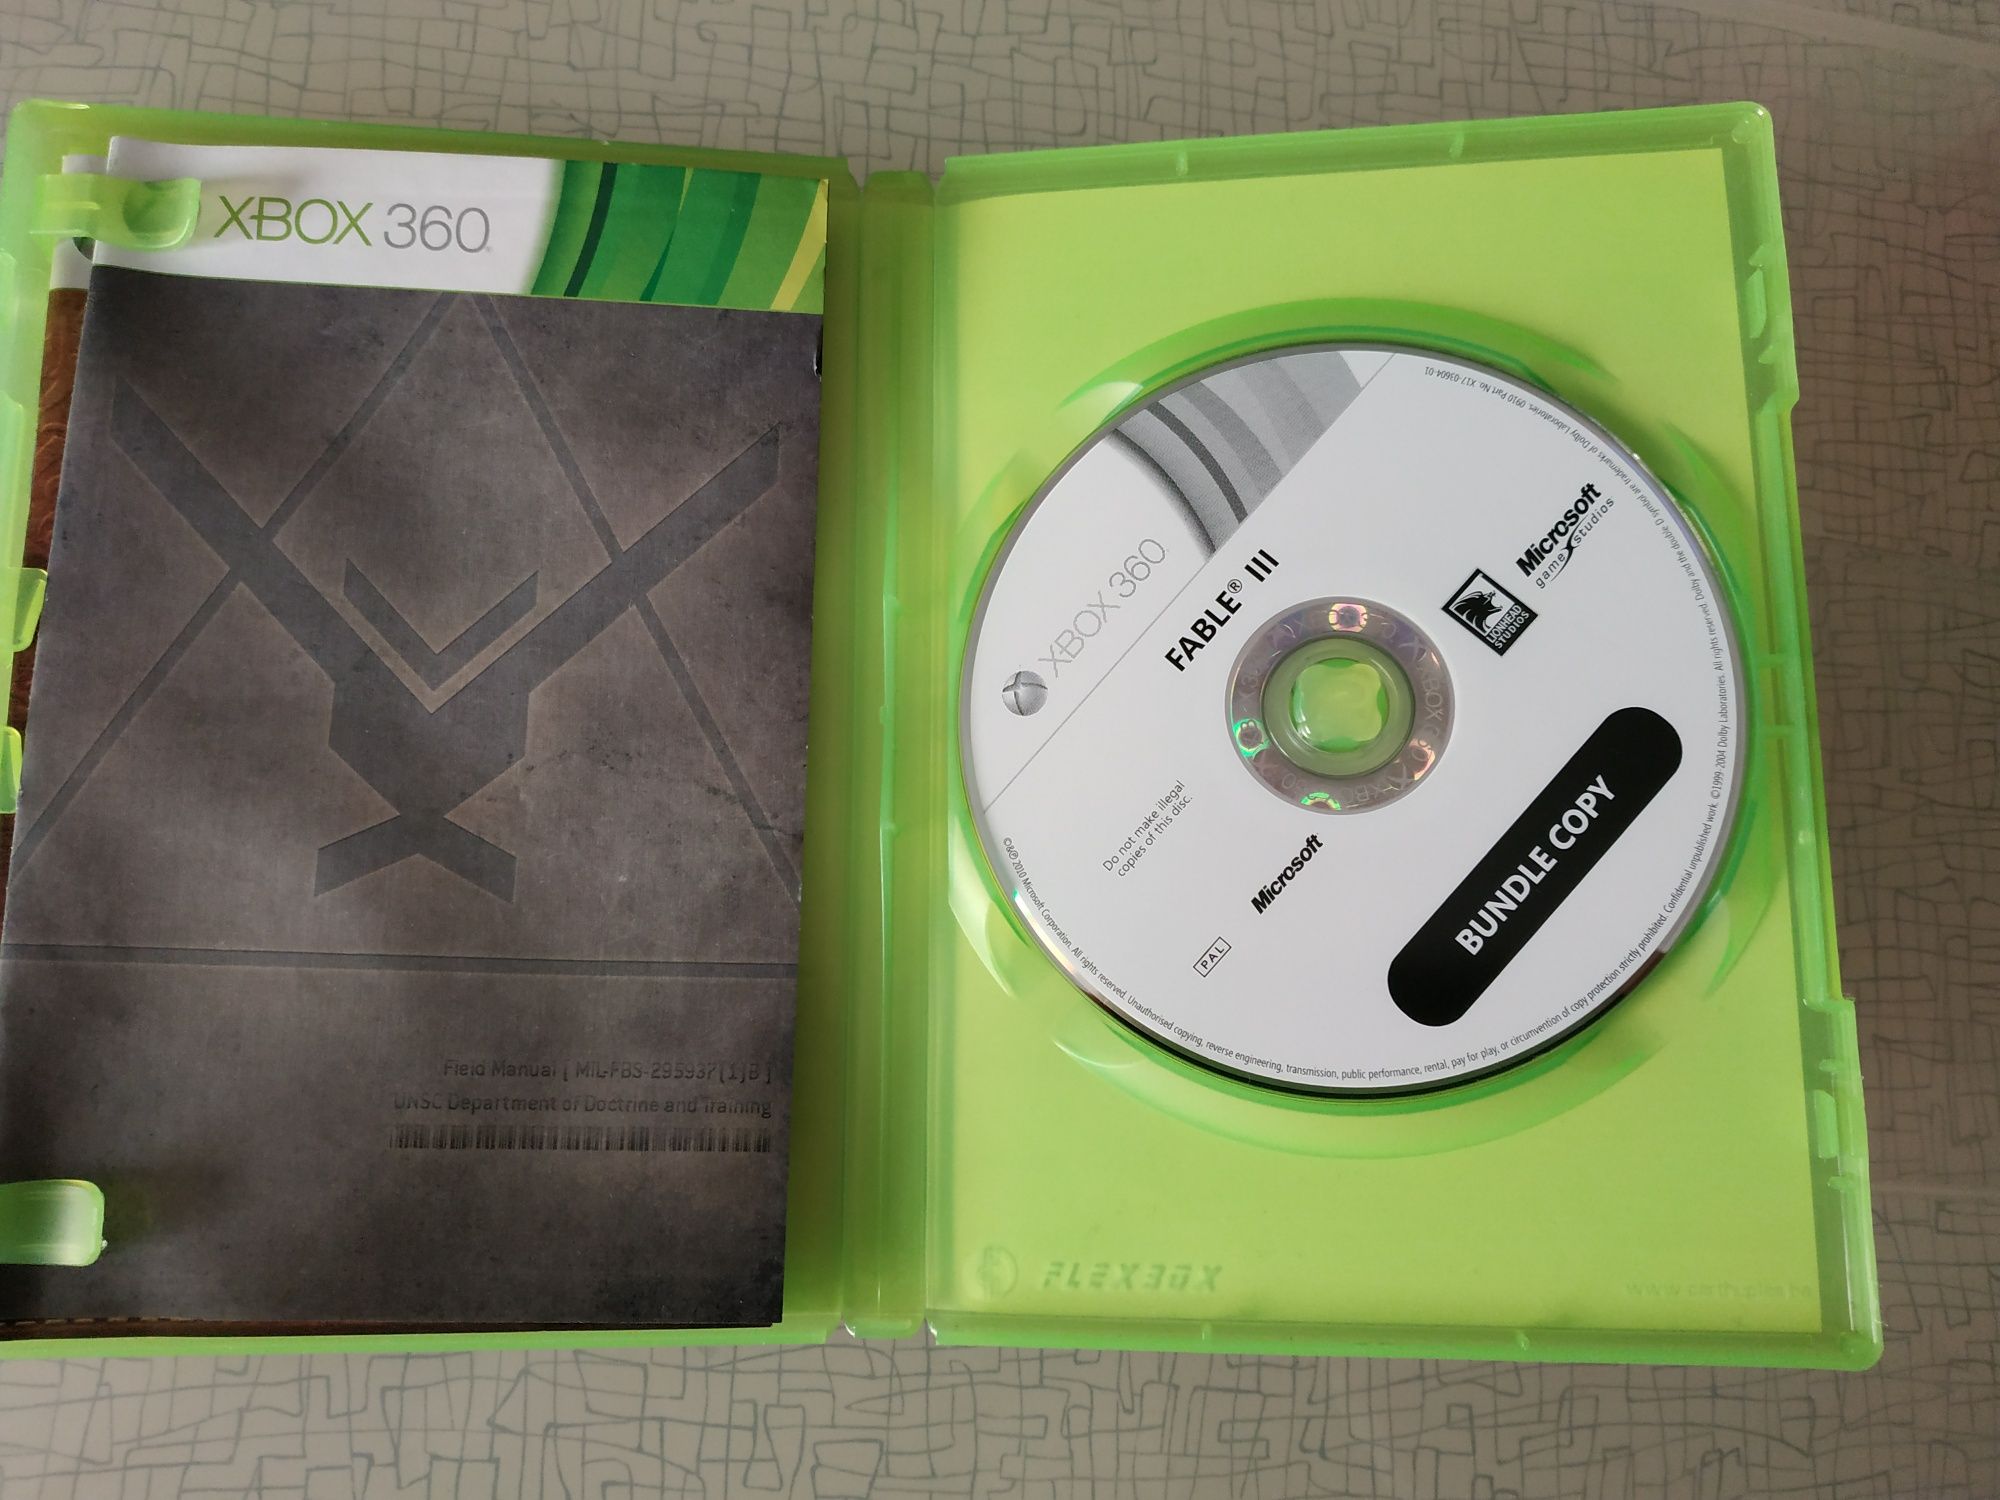 Jogo "Halo Reach + Fable III Double Pack" XBOX 360